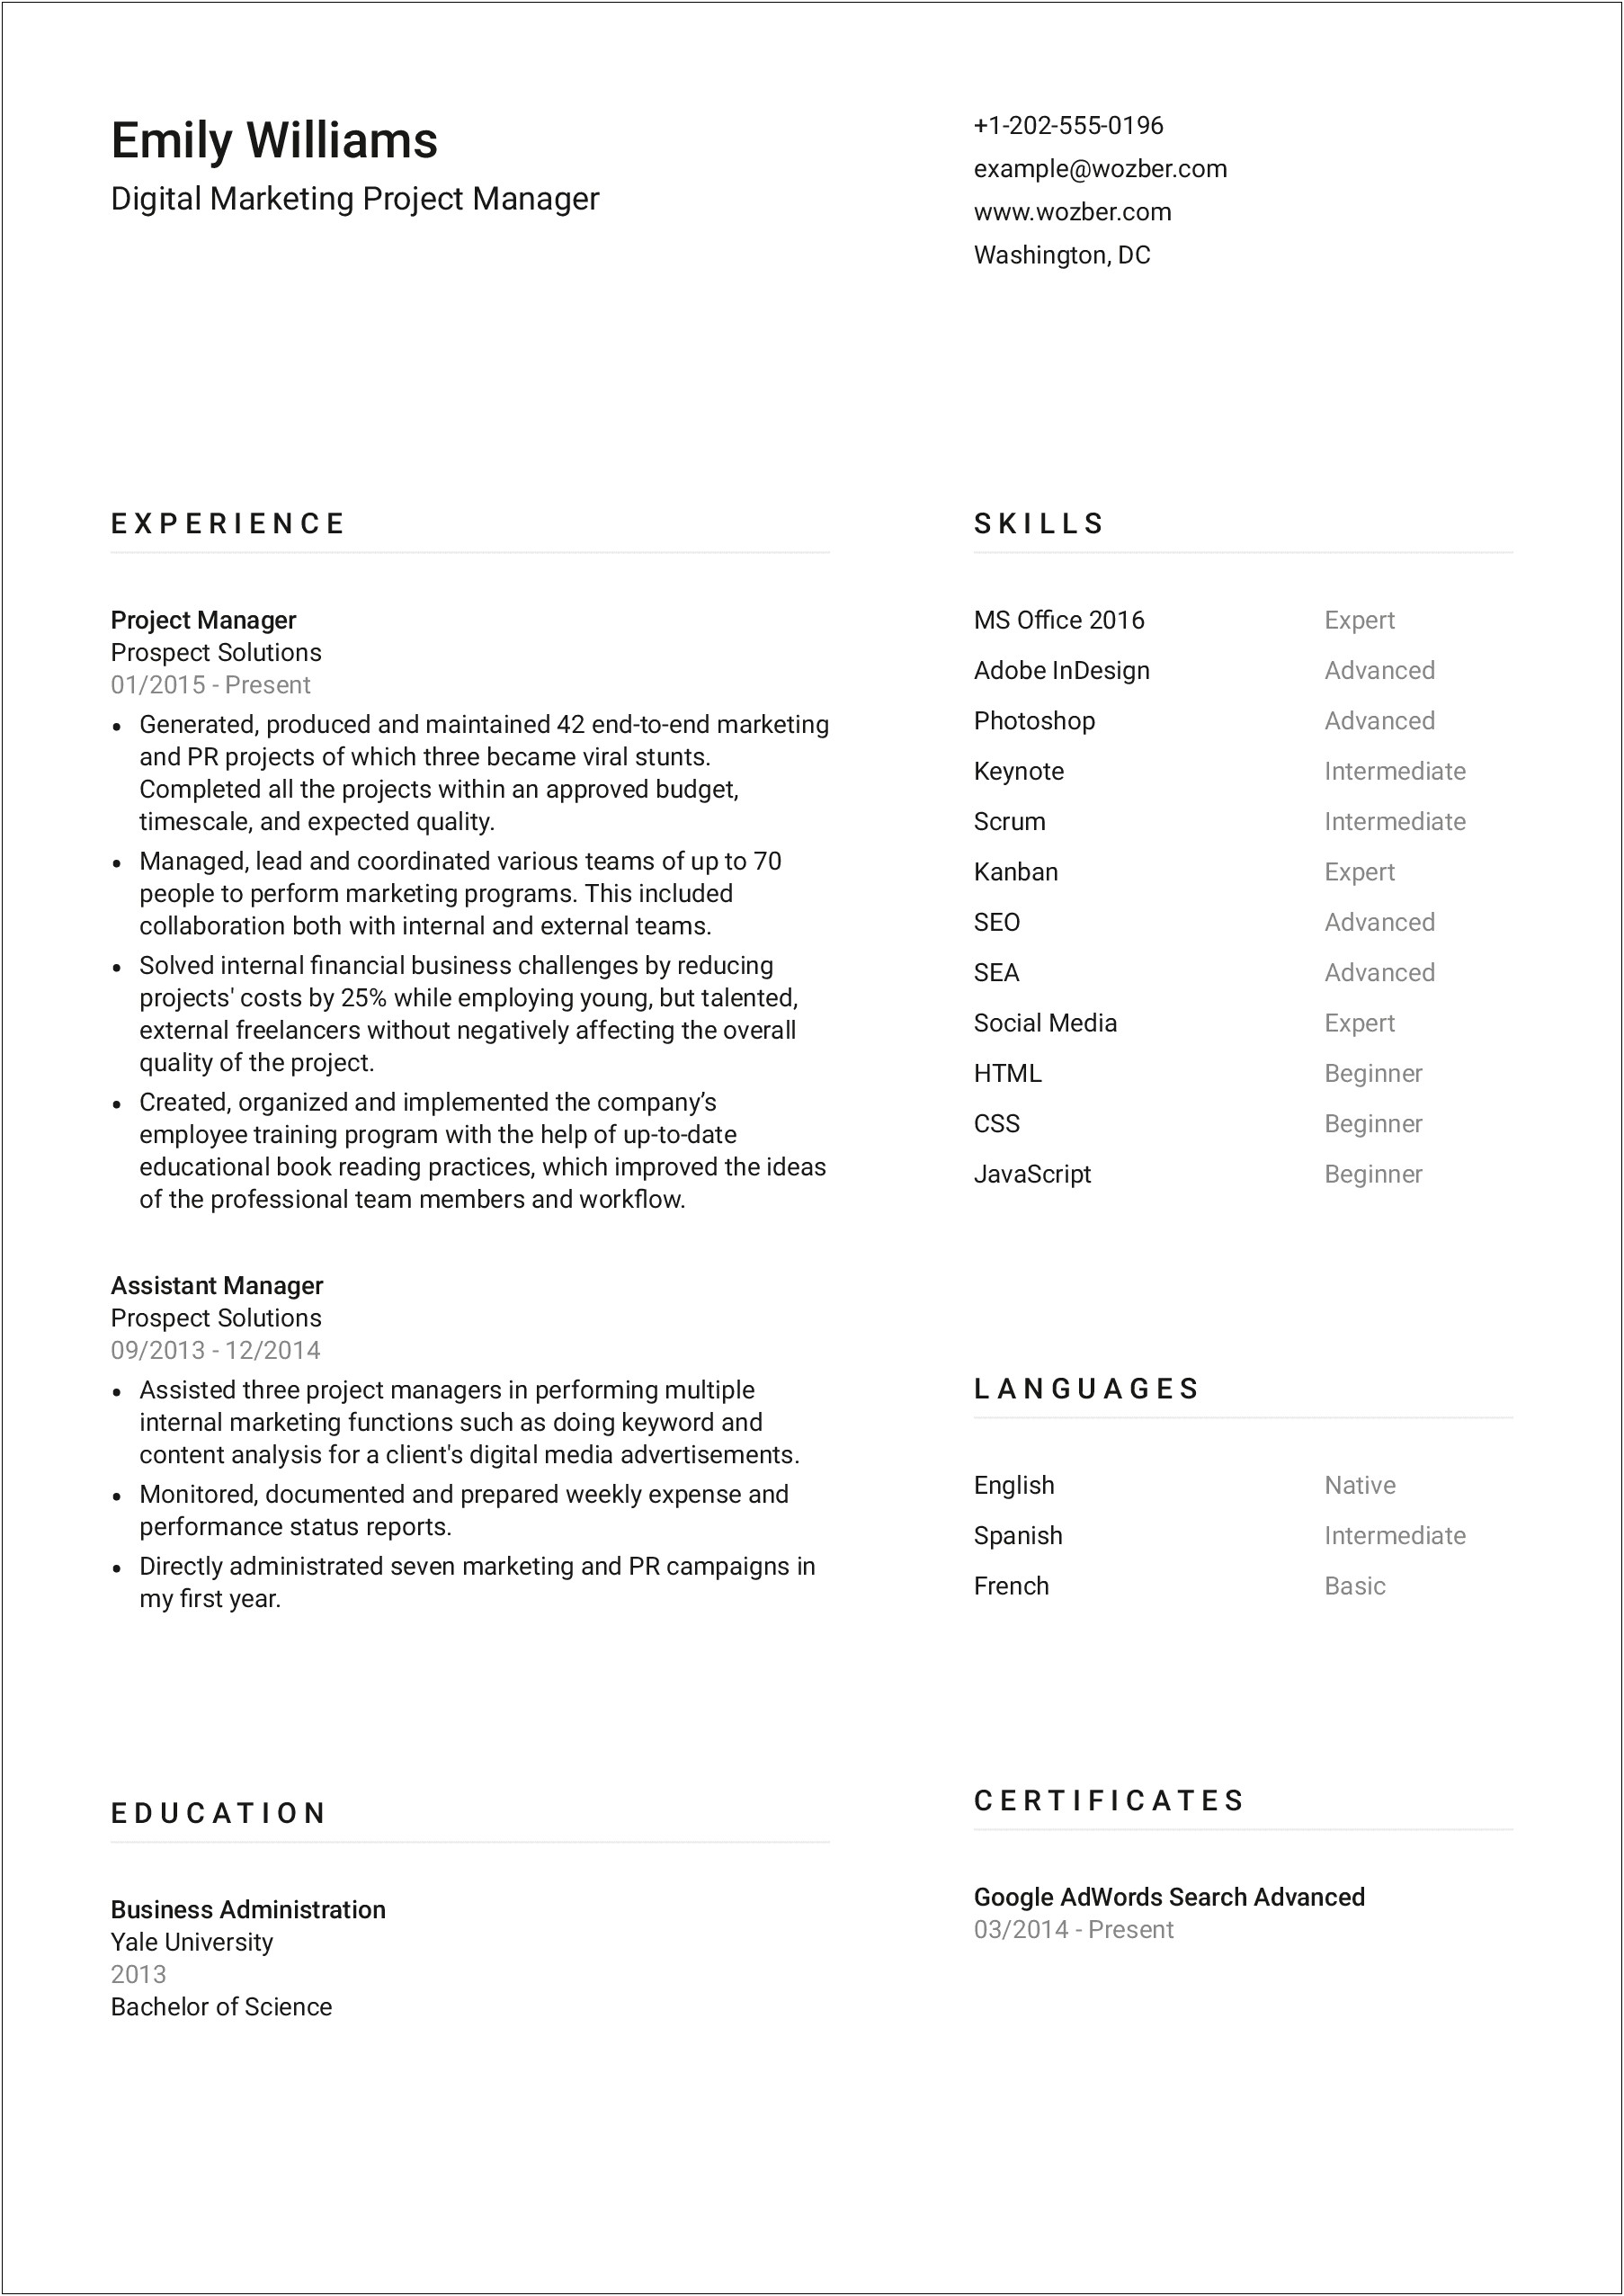 Resume Summary Template Of It Professional